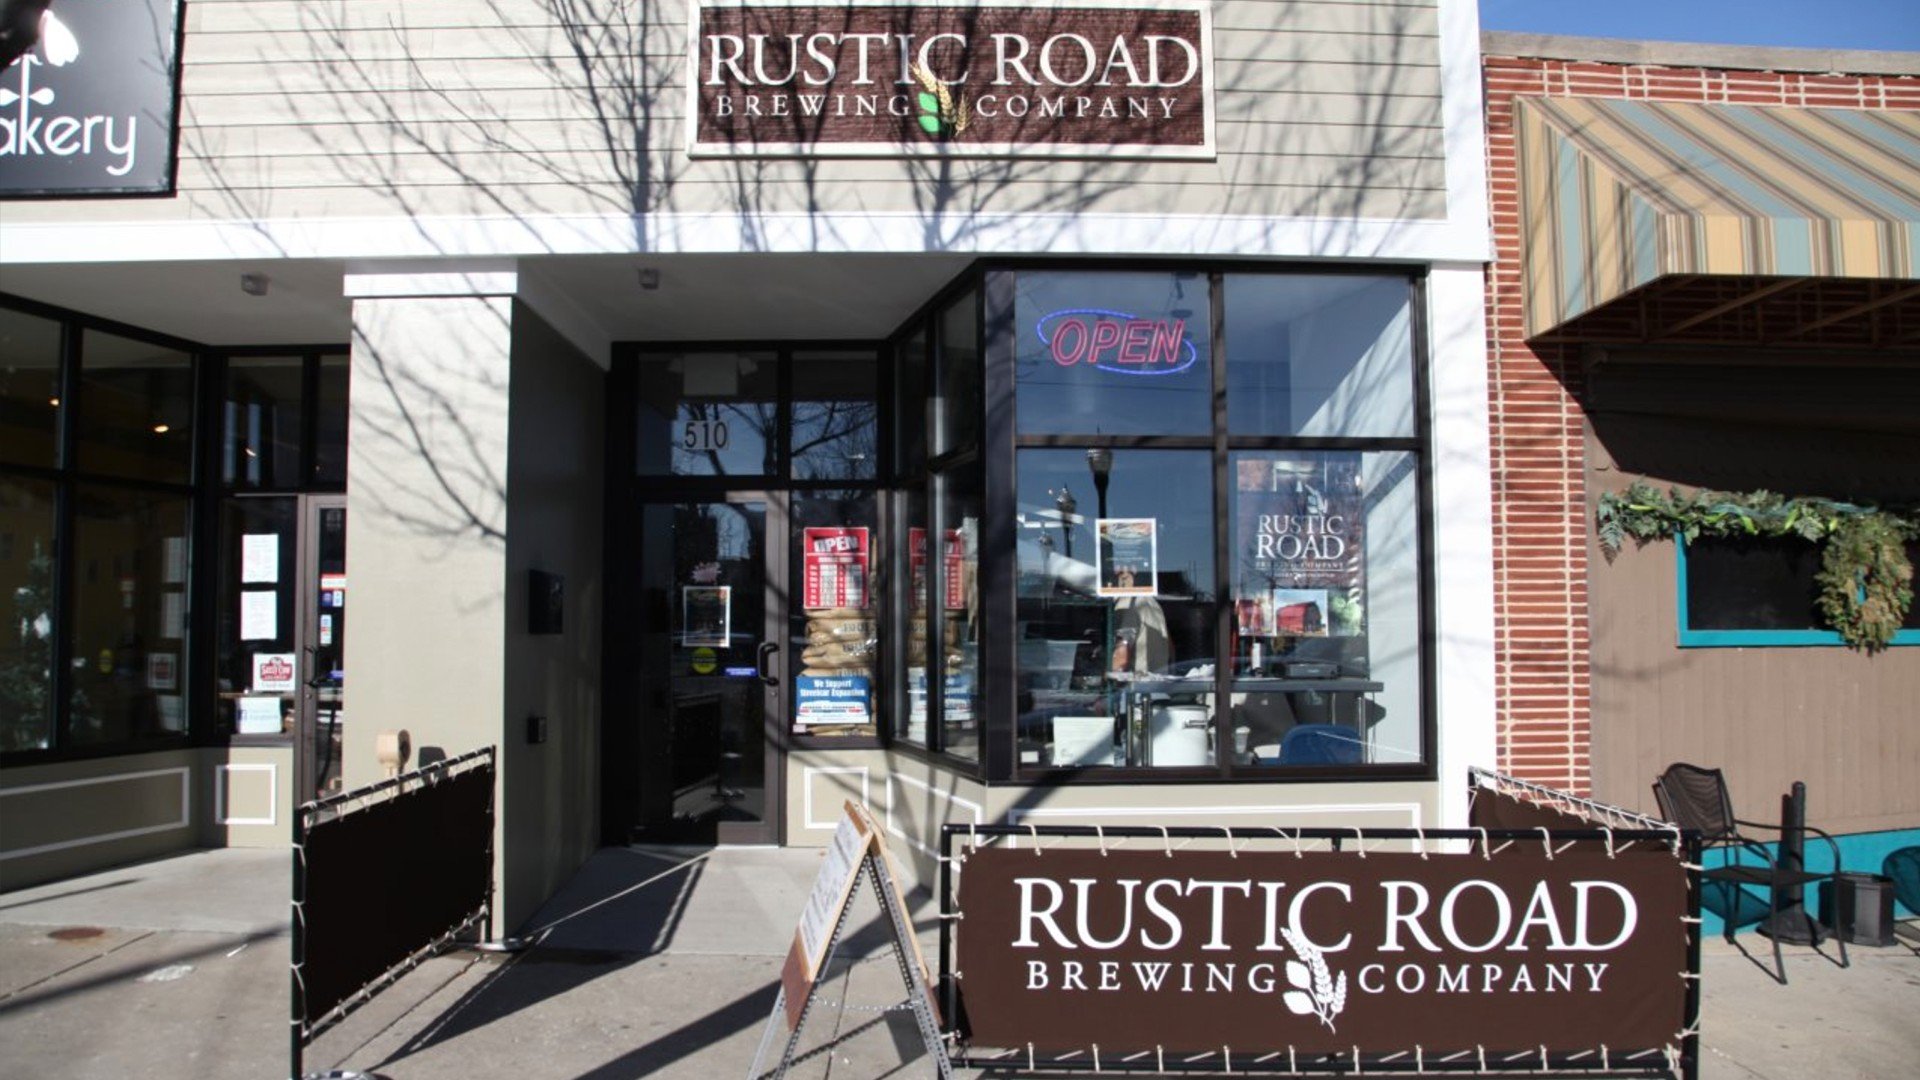 Rush River Brewing brewery from United States